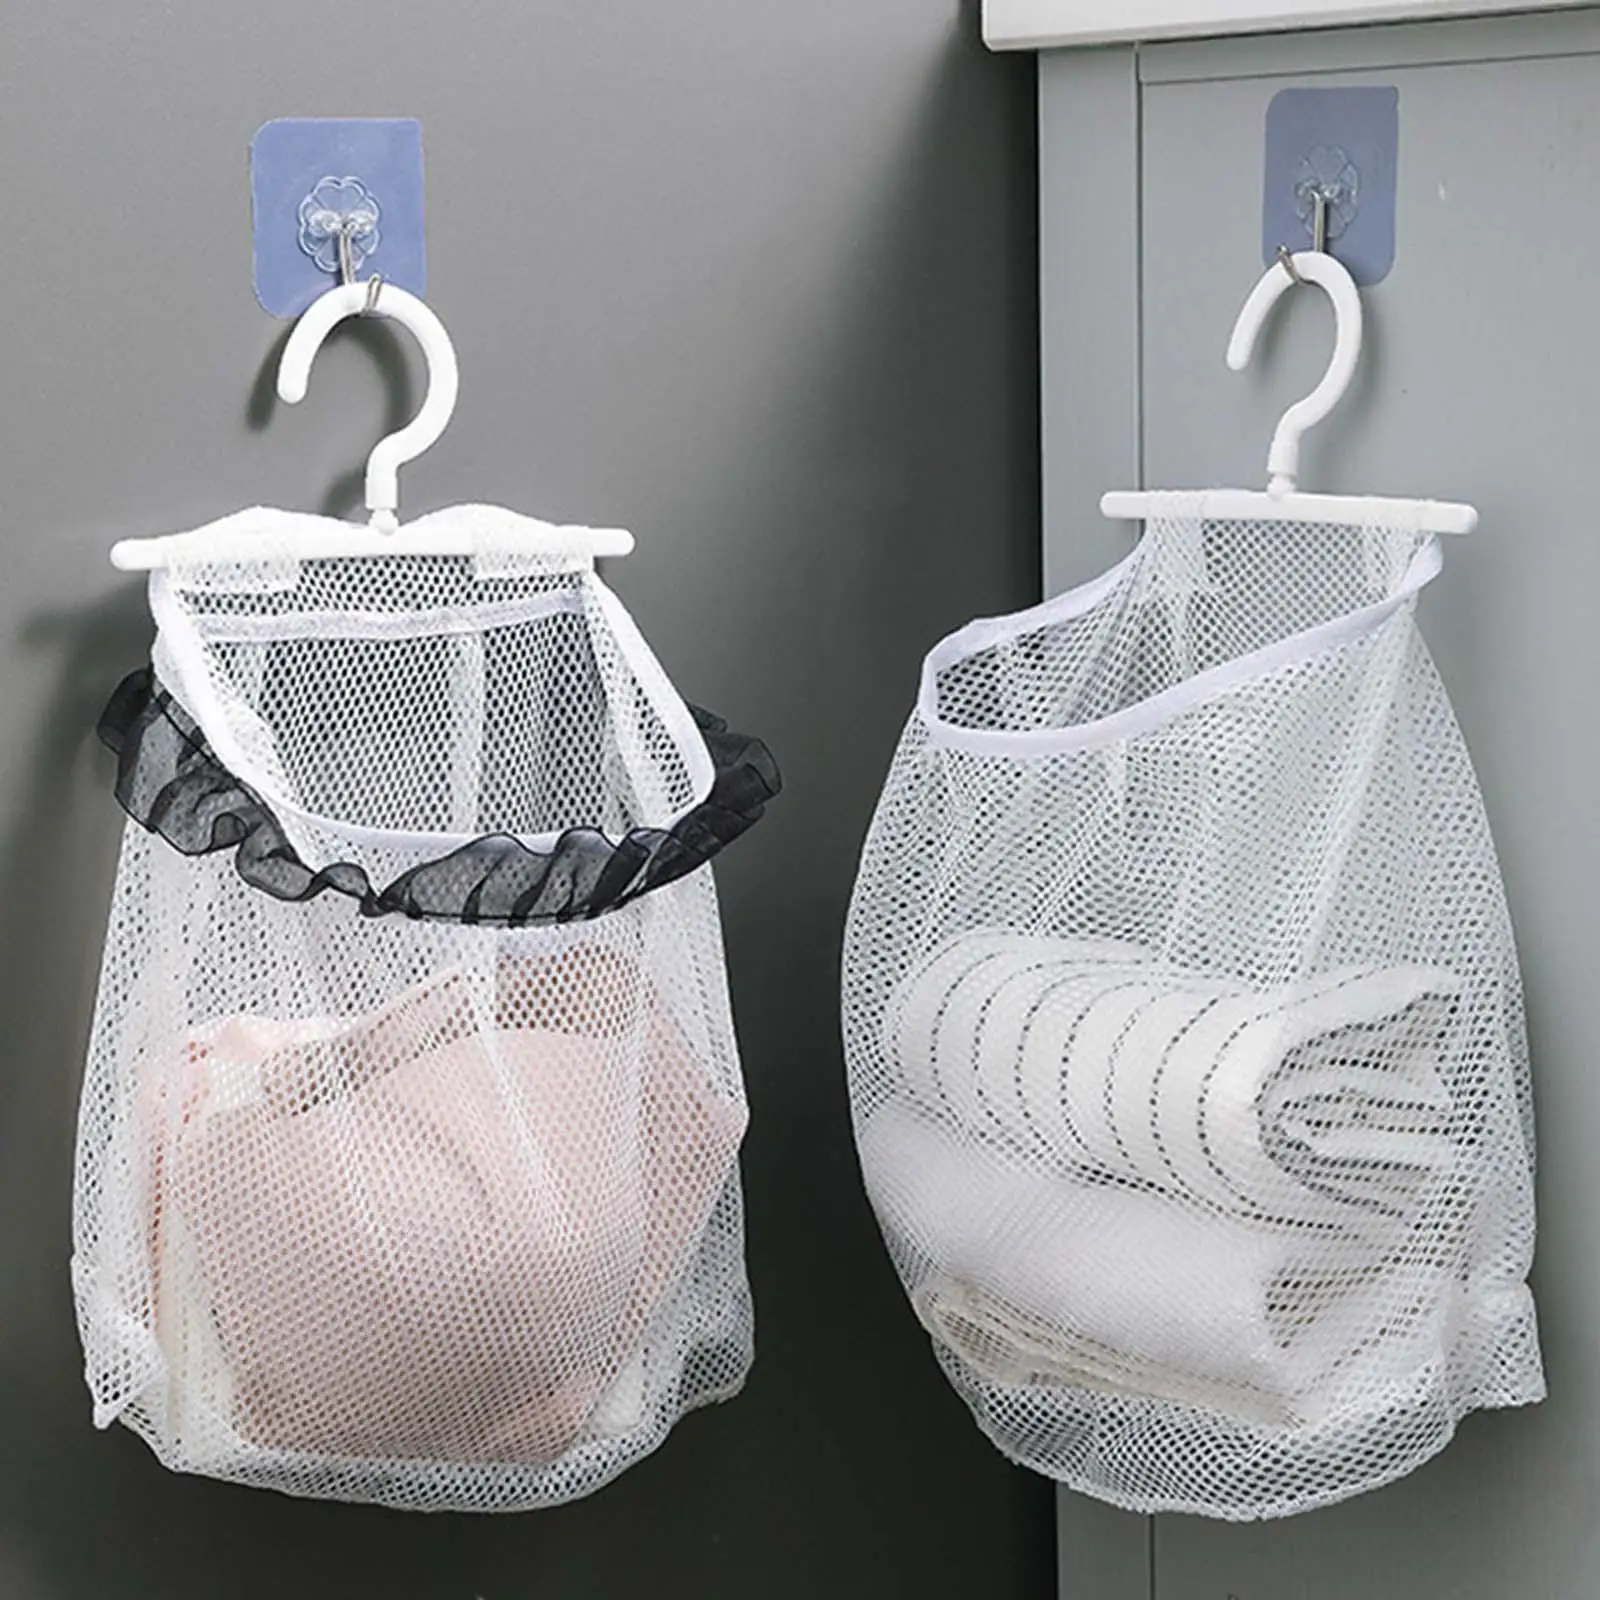 Clothespin Bag with Hanger Breathable Mesh Nets for Bathroom Travel Hotel